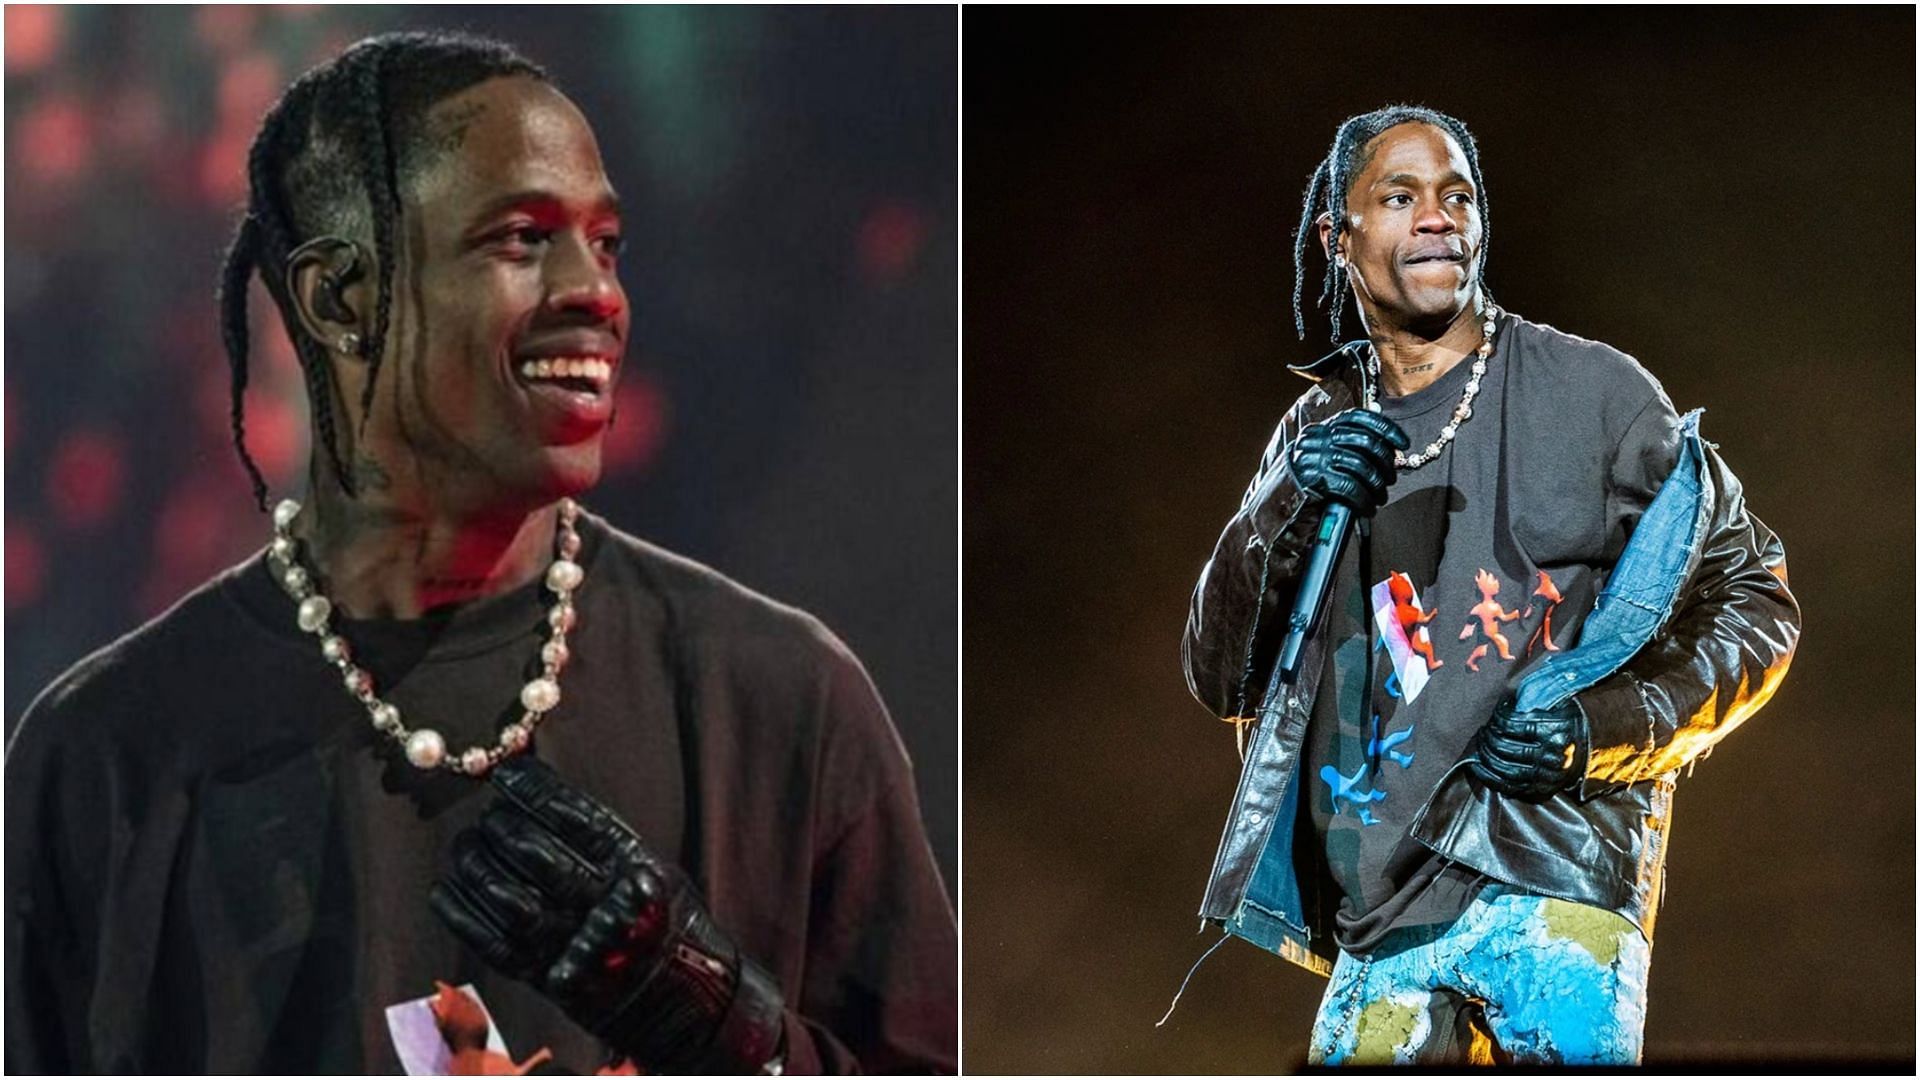 Travis Scott (Images via AP and Erica Goldring/Getty Images)